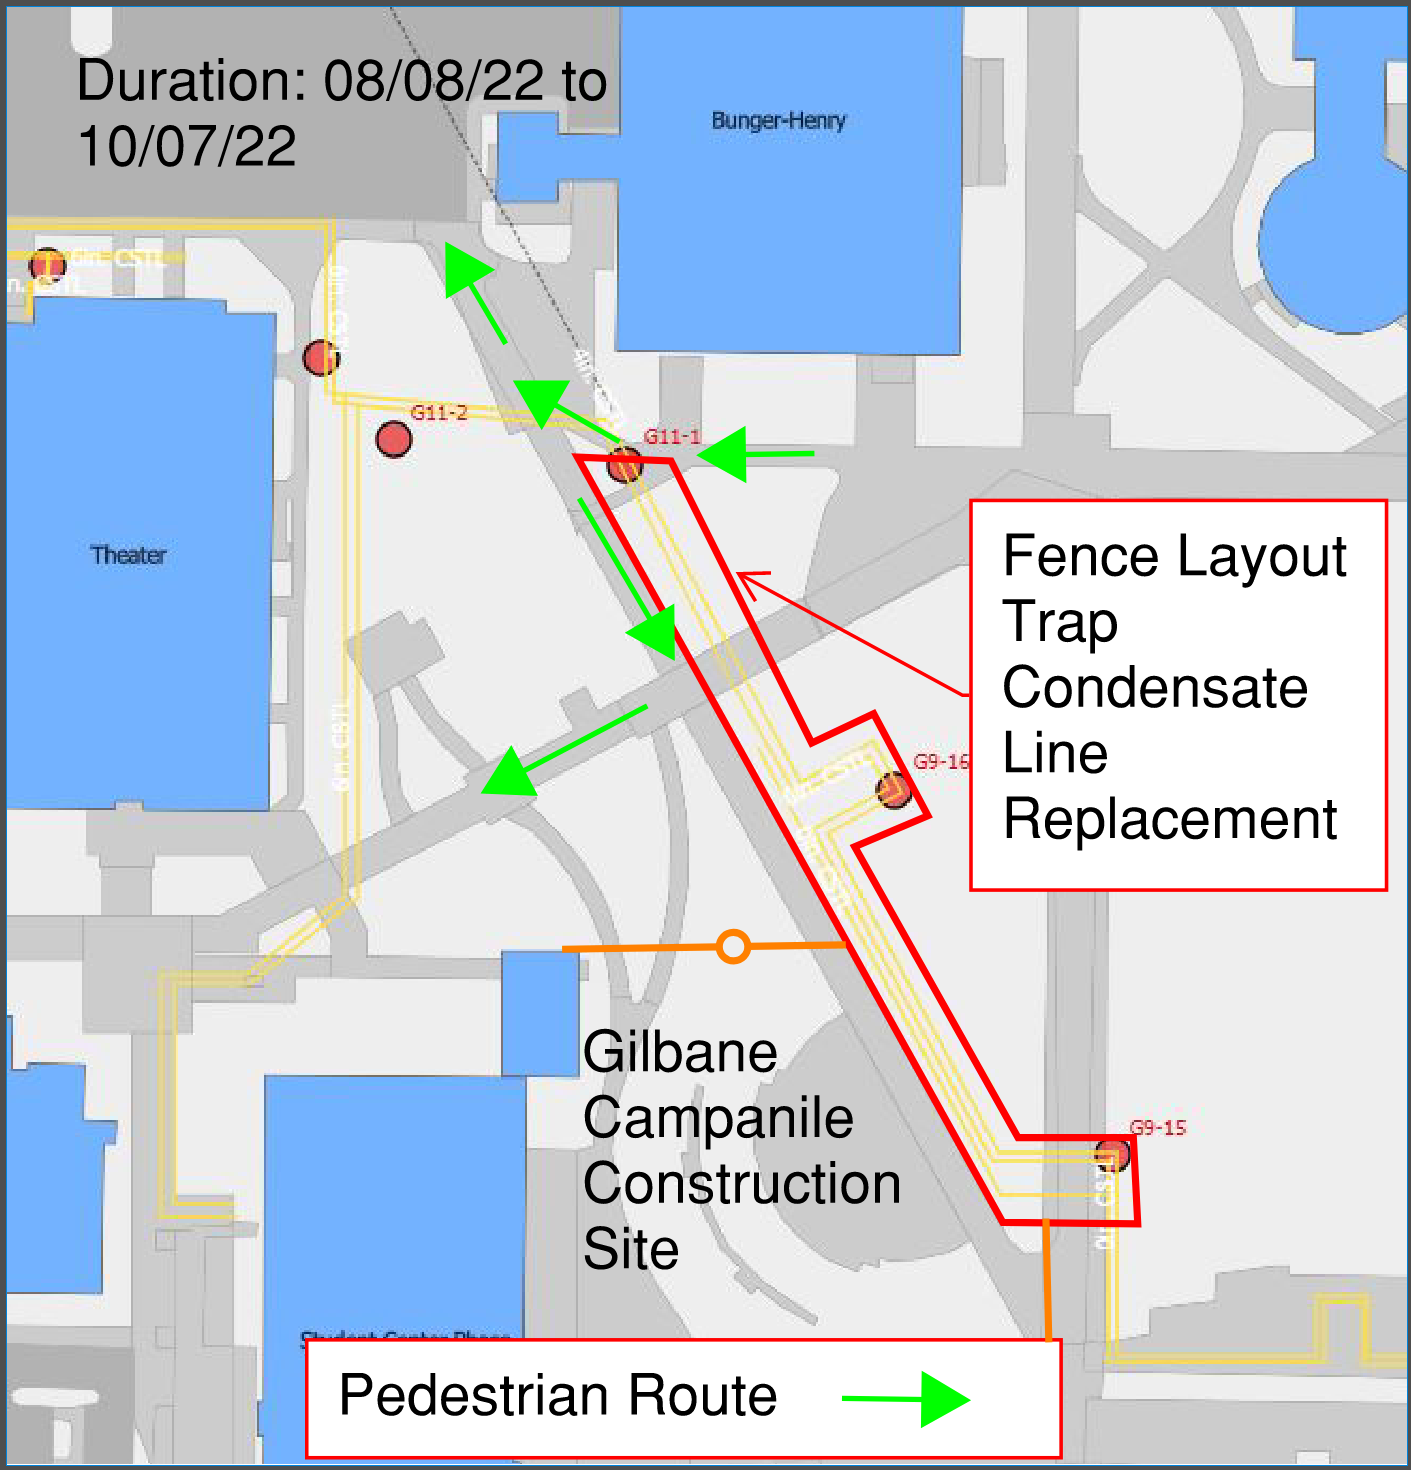 Beginning Monday, August 8th fencing will be mobilized adjacent to the Gilbane Campanile Construction Site to replace a trap condensate line that extends from Steam Manhole G11-1 to G9-15.  The duration of this construction will extend through Friday, October 7th.  This work is weather dependent and any changes to the schedule will be communicated as they become known.

This project is being coordinated with Gilbane as limited access to their site will be required for certain portions of the pipe replace